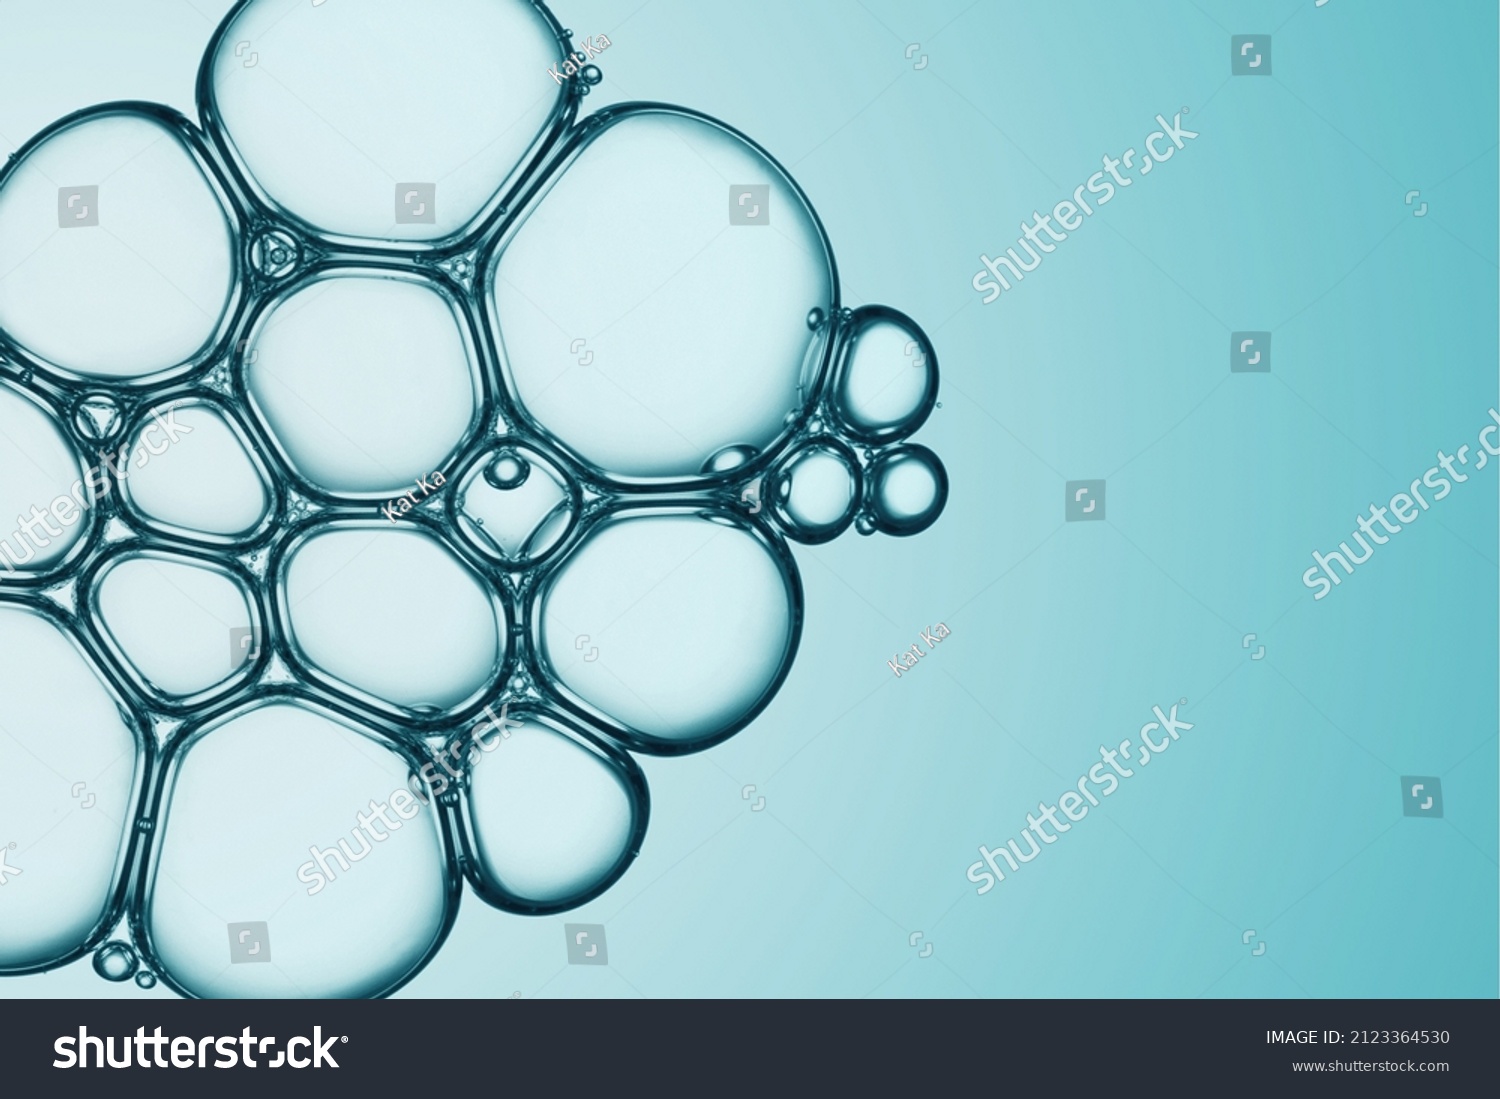 Cell, molecule concept. Soap bubbles group macro representing abstract cell structure microscope view. Blue science, chemistry background #2123364530